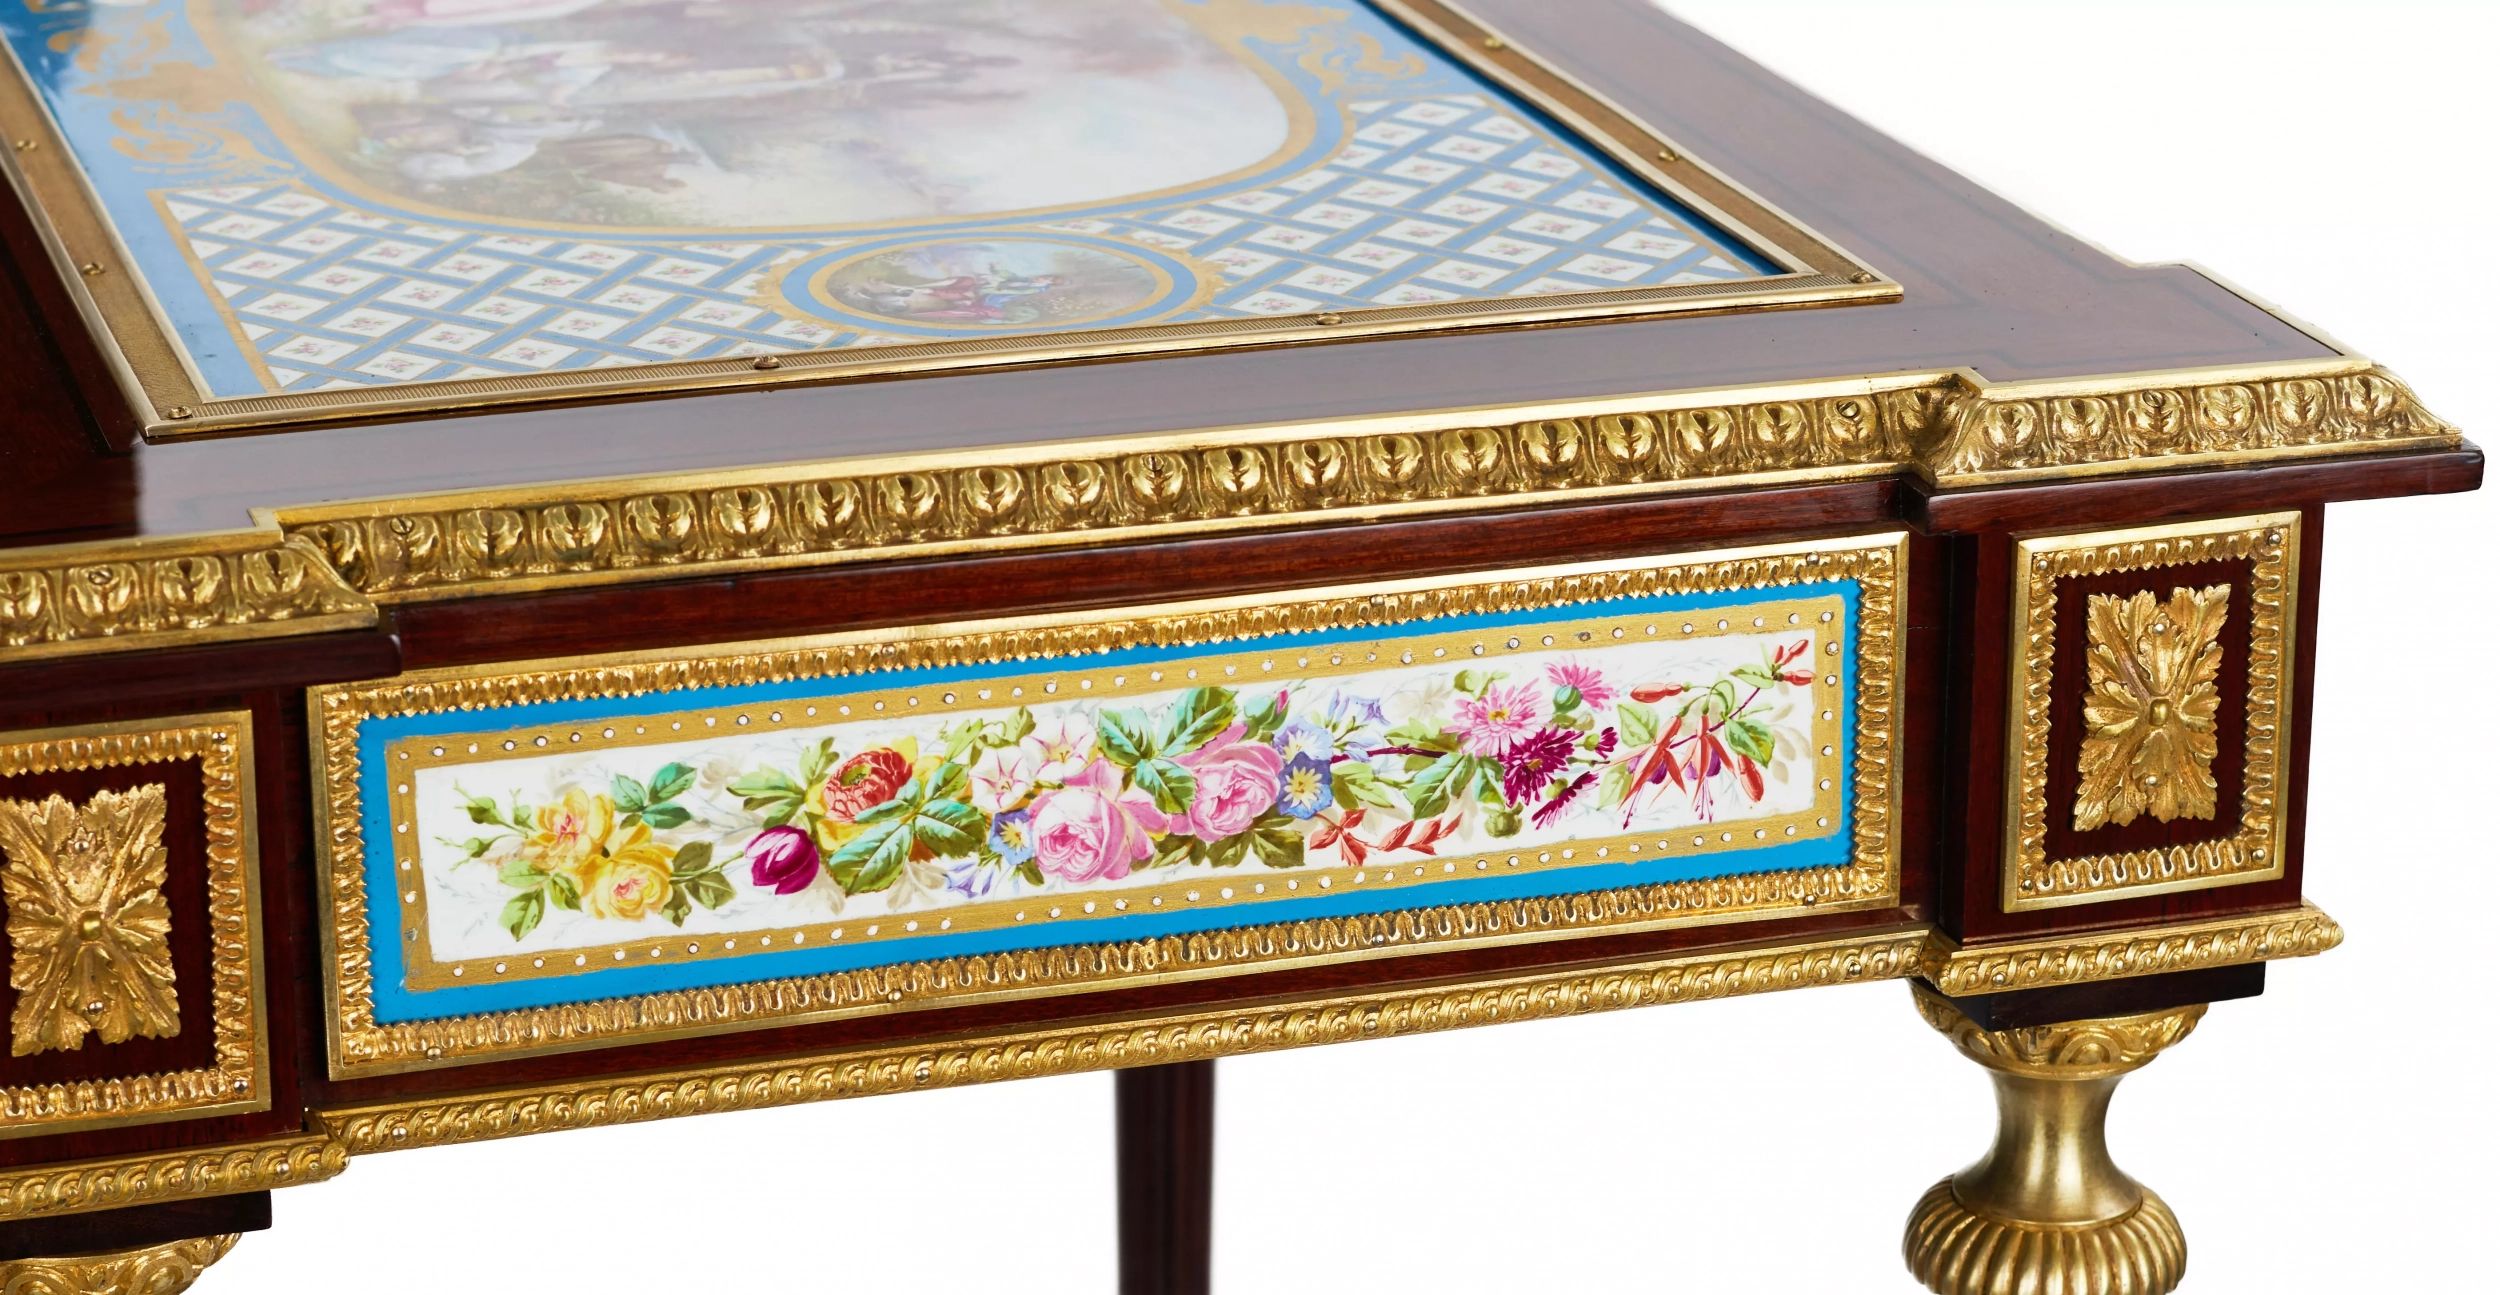 A magnificent ladies table with gilded bronze decor and porcelain panels in the style of Adam Weiswe - Image 9 of 12